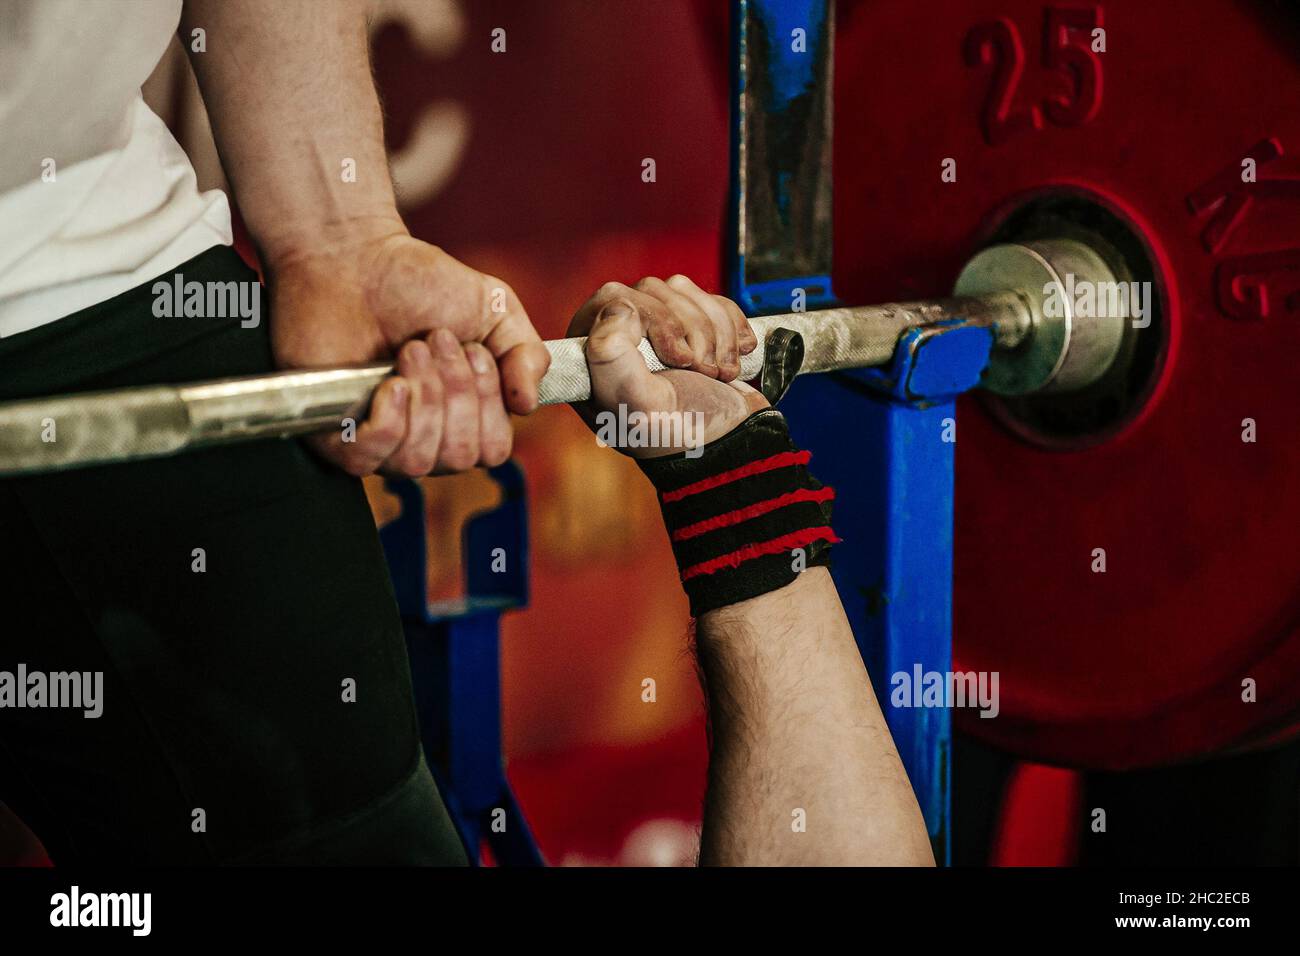 male athlete and barbell exercise bench press Stock Photo